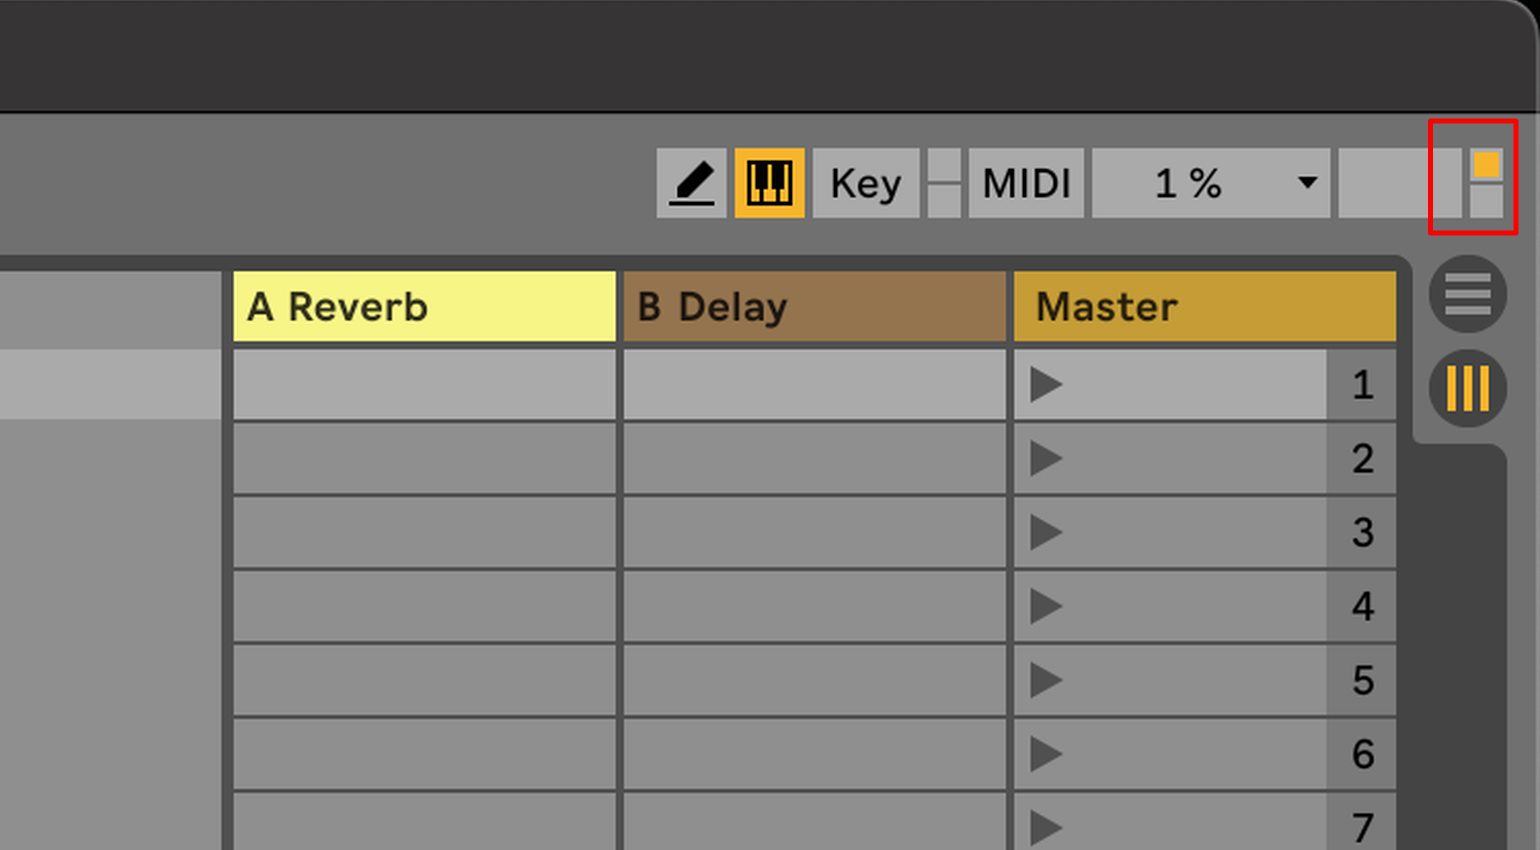 How to use a MIDI controller: The little yellow indicator in Ableton shows incoming MIDI note activity.